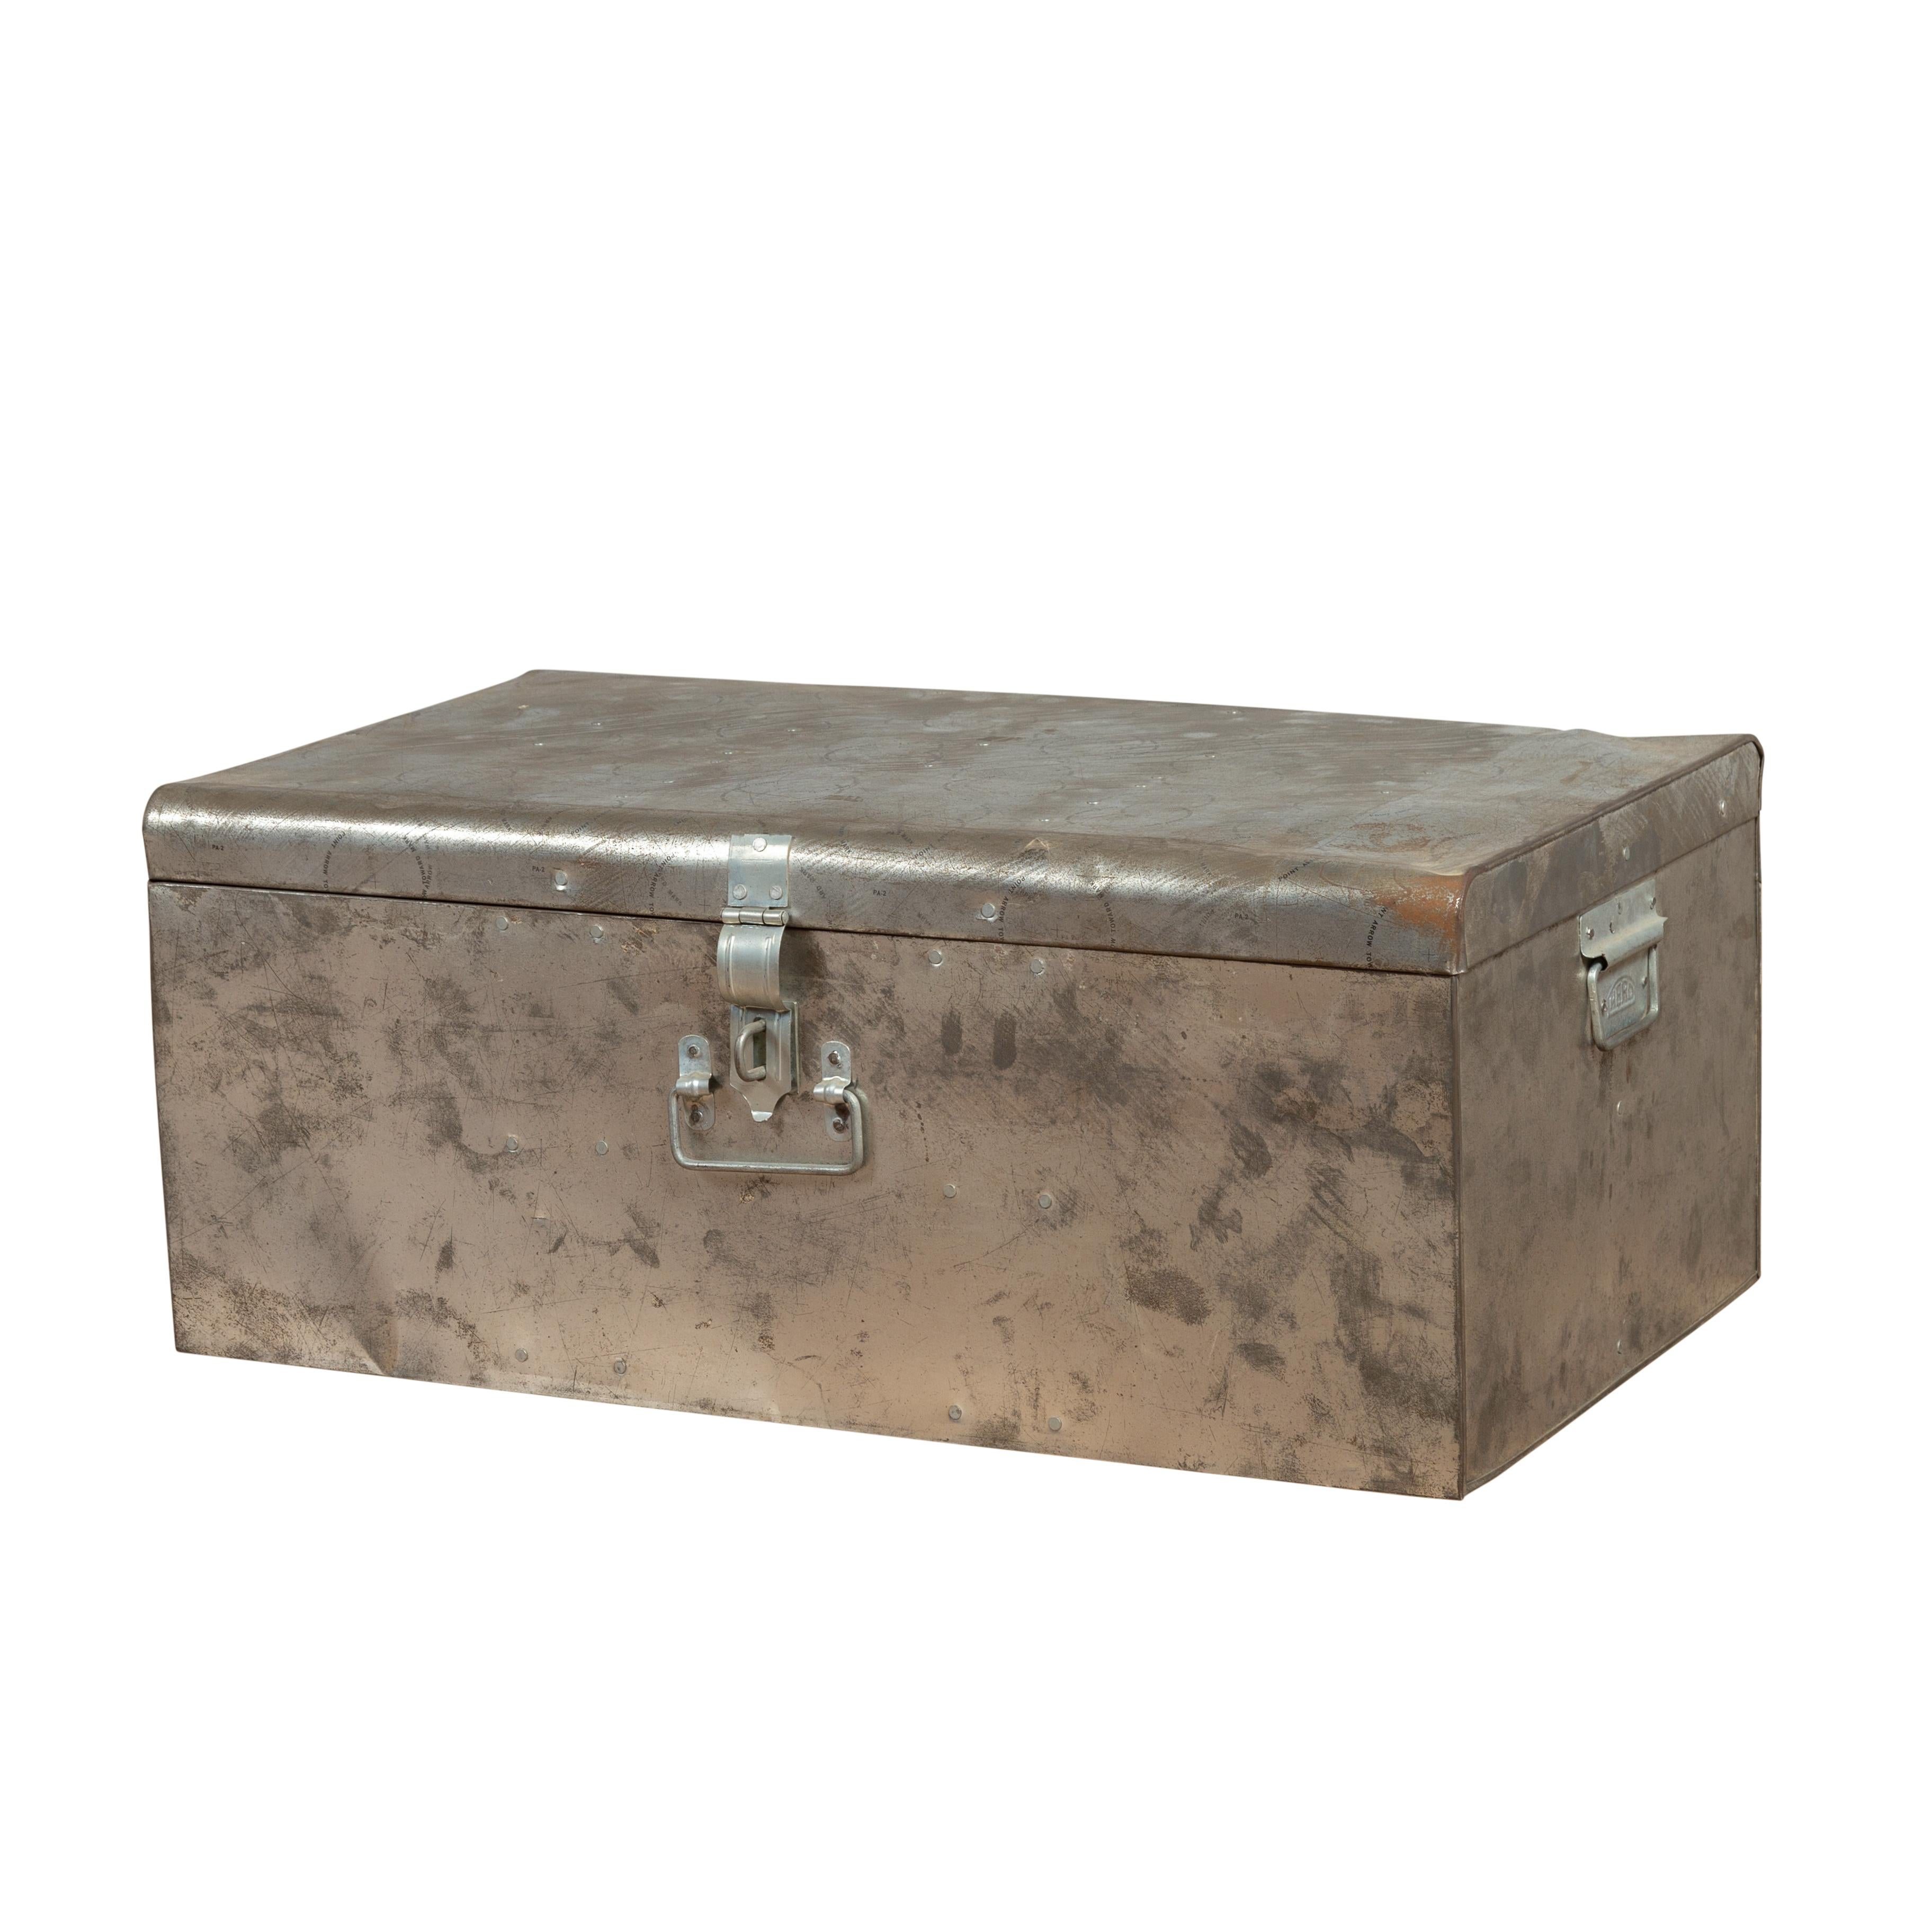 Indian Vintage Metal Tool Box with Distressed Silver Colored Finish and Handles